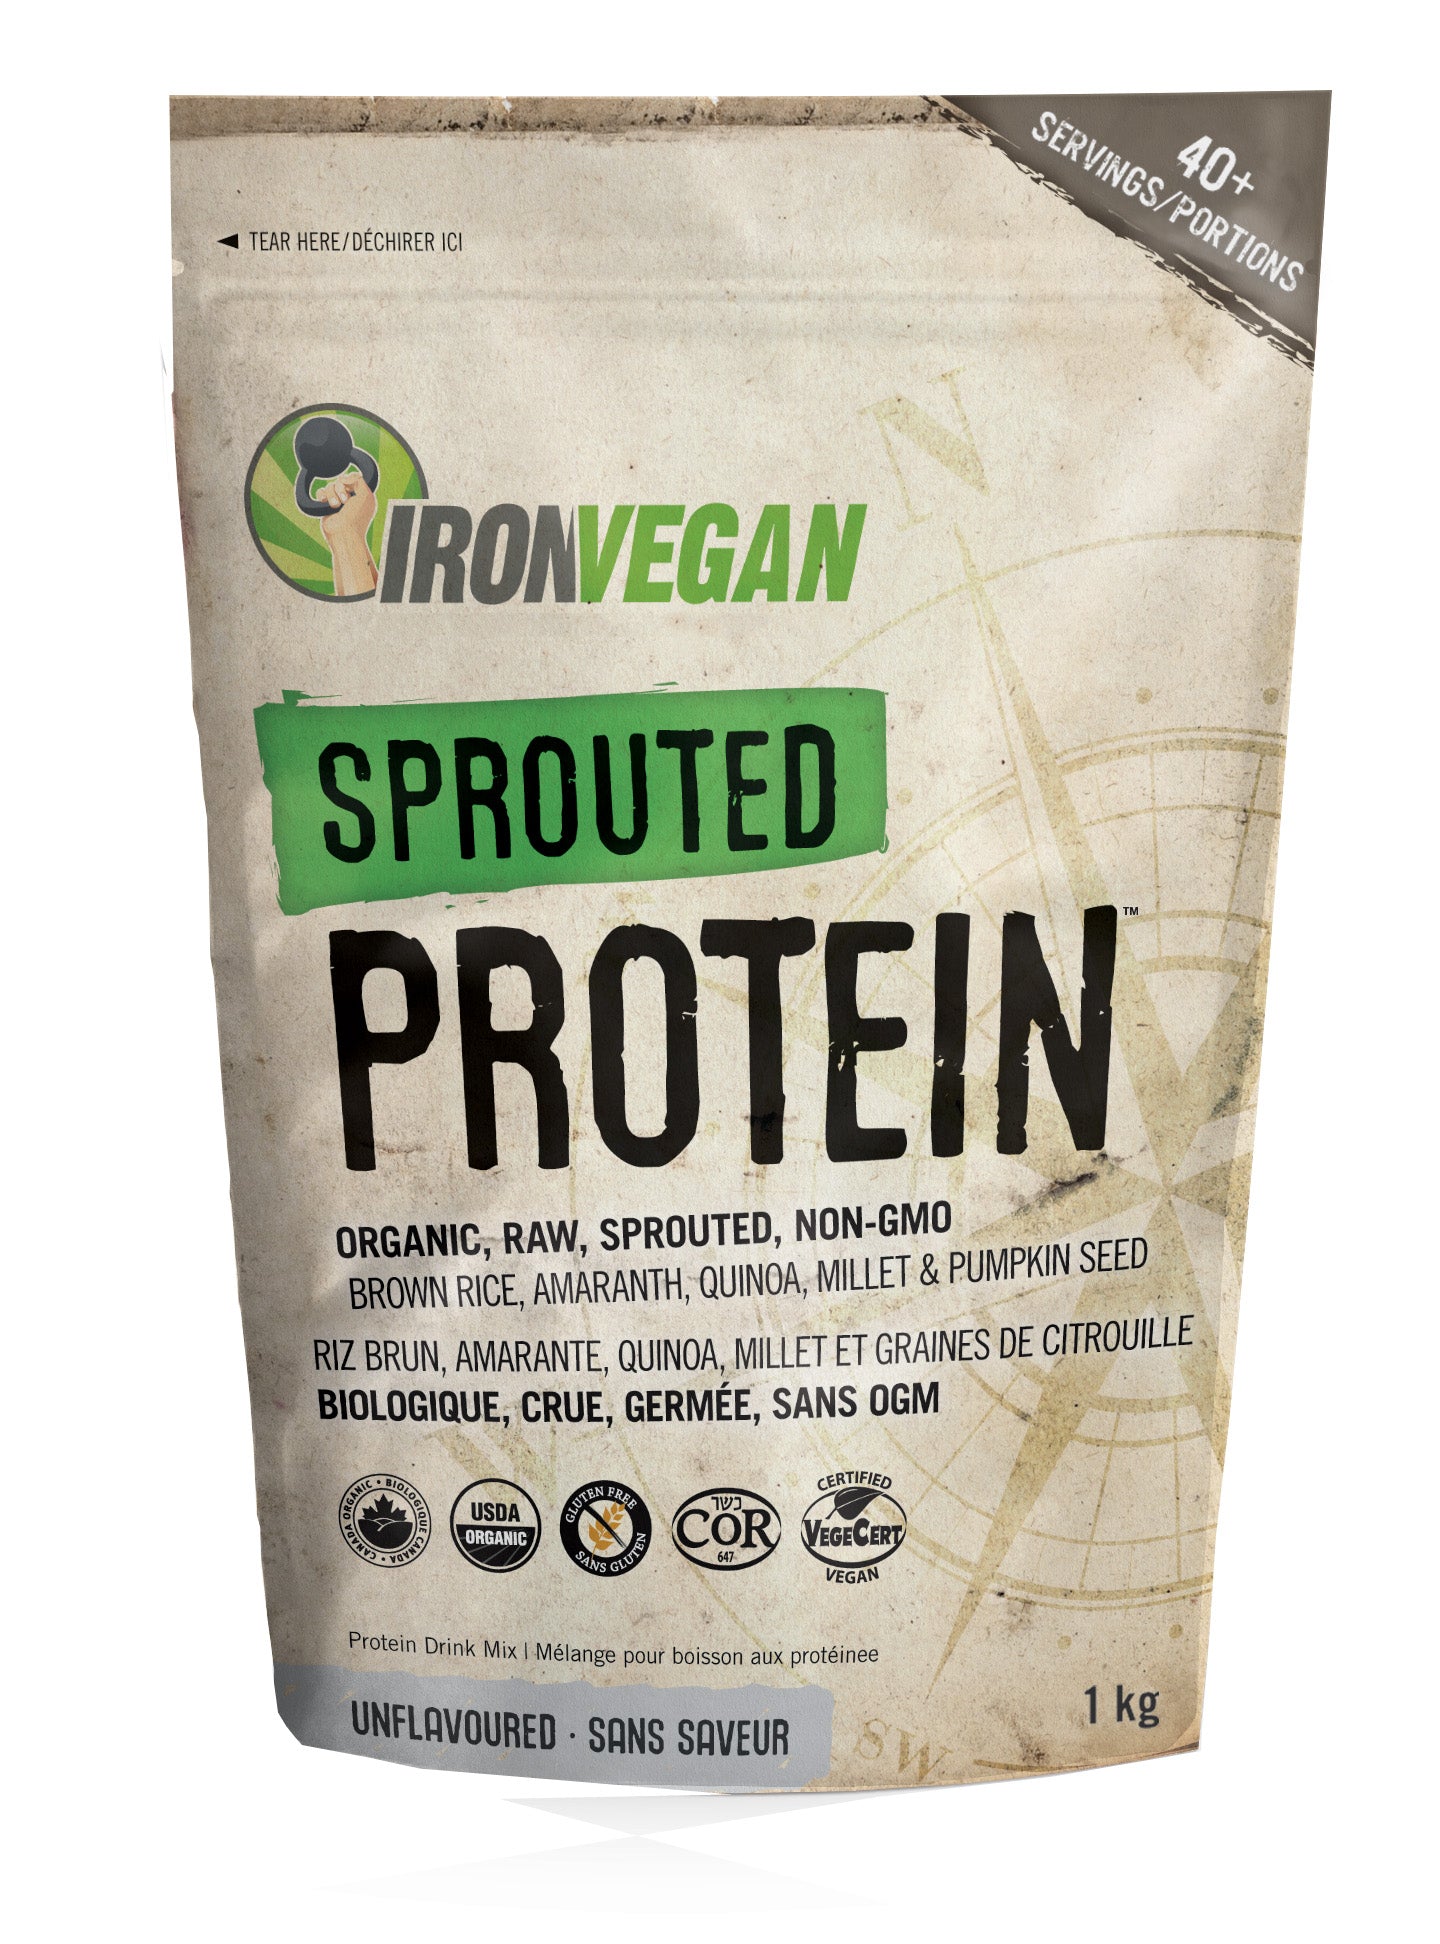 Unflavored organic sprouted protein 1kg